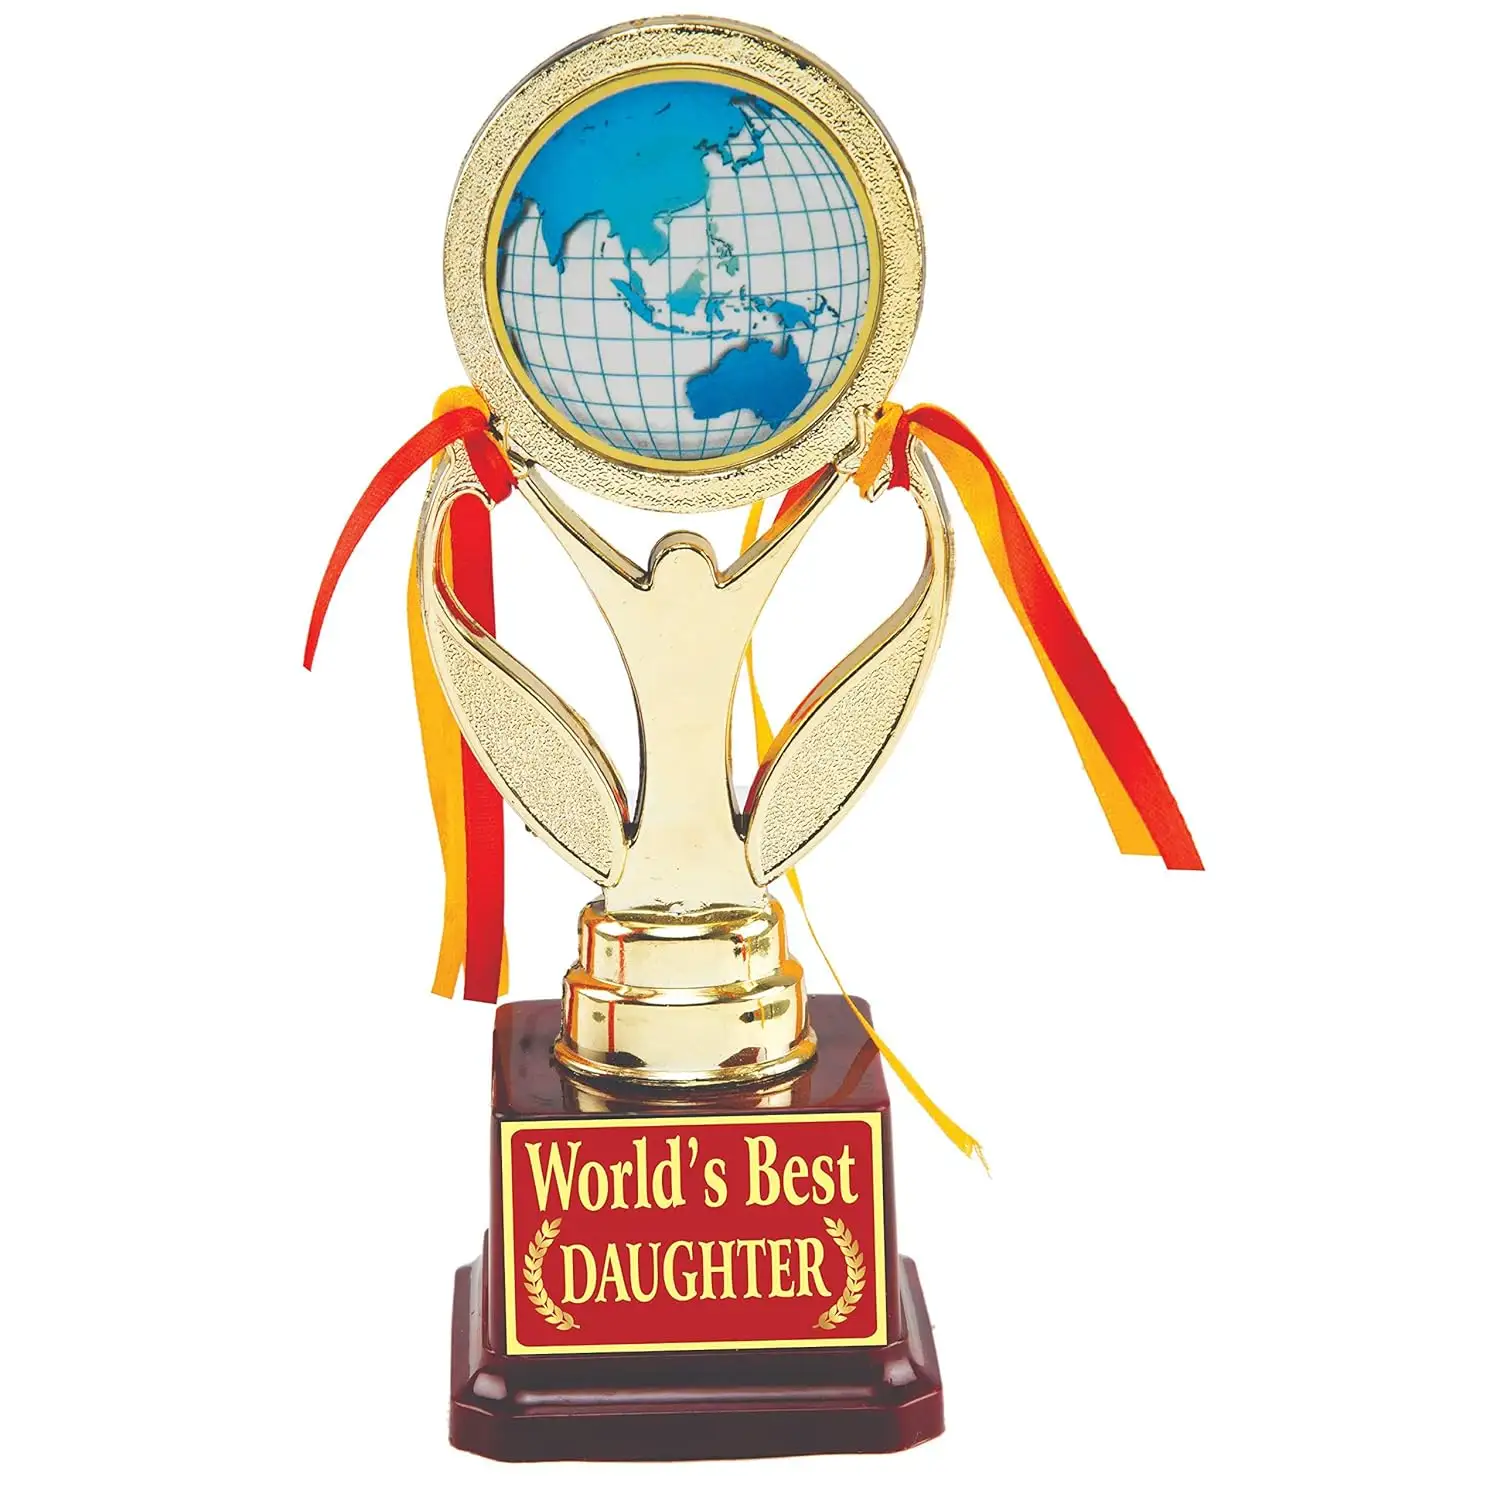 Factory Sale Super Quality Gift Awards For Best Daughter Gold Metal Trophy Of Honor With Best Selling Top Ranked